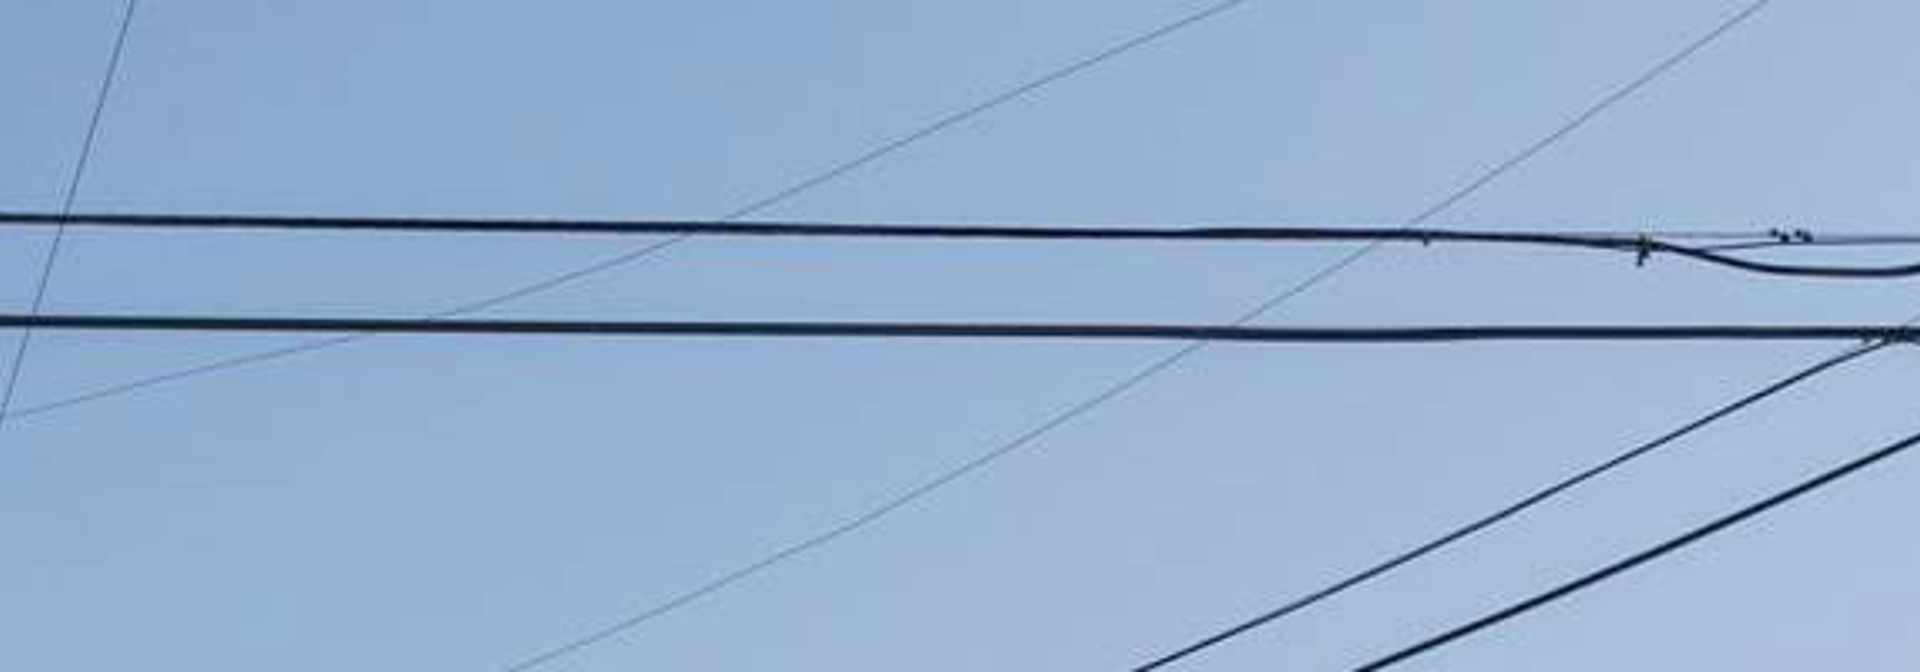 Utility Lines Subpage Banner